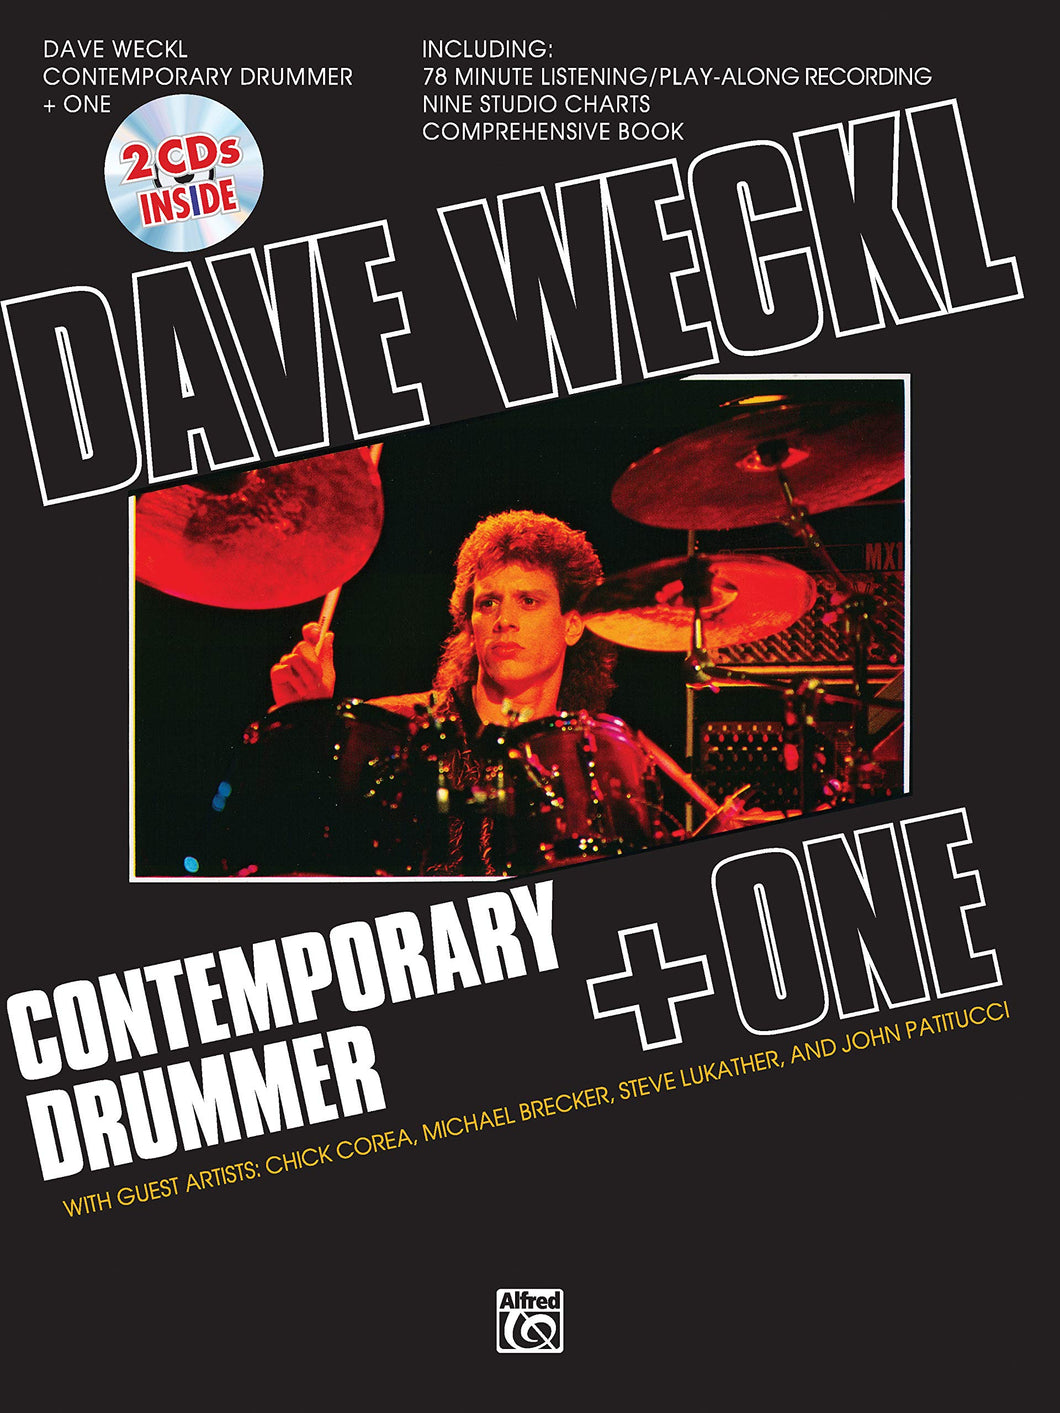 Love Me a Little Bit - Dave Weckl - Collection of Drum Transcriptions / Drum Sheet Music - Alfred Music DWCDO